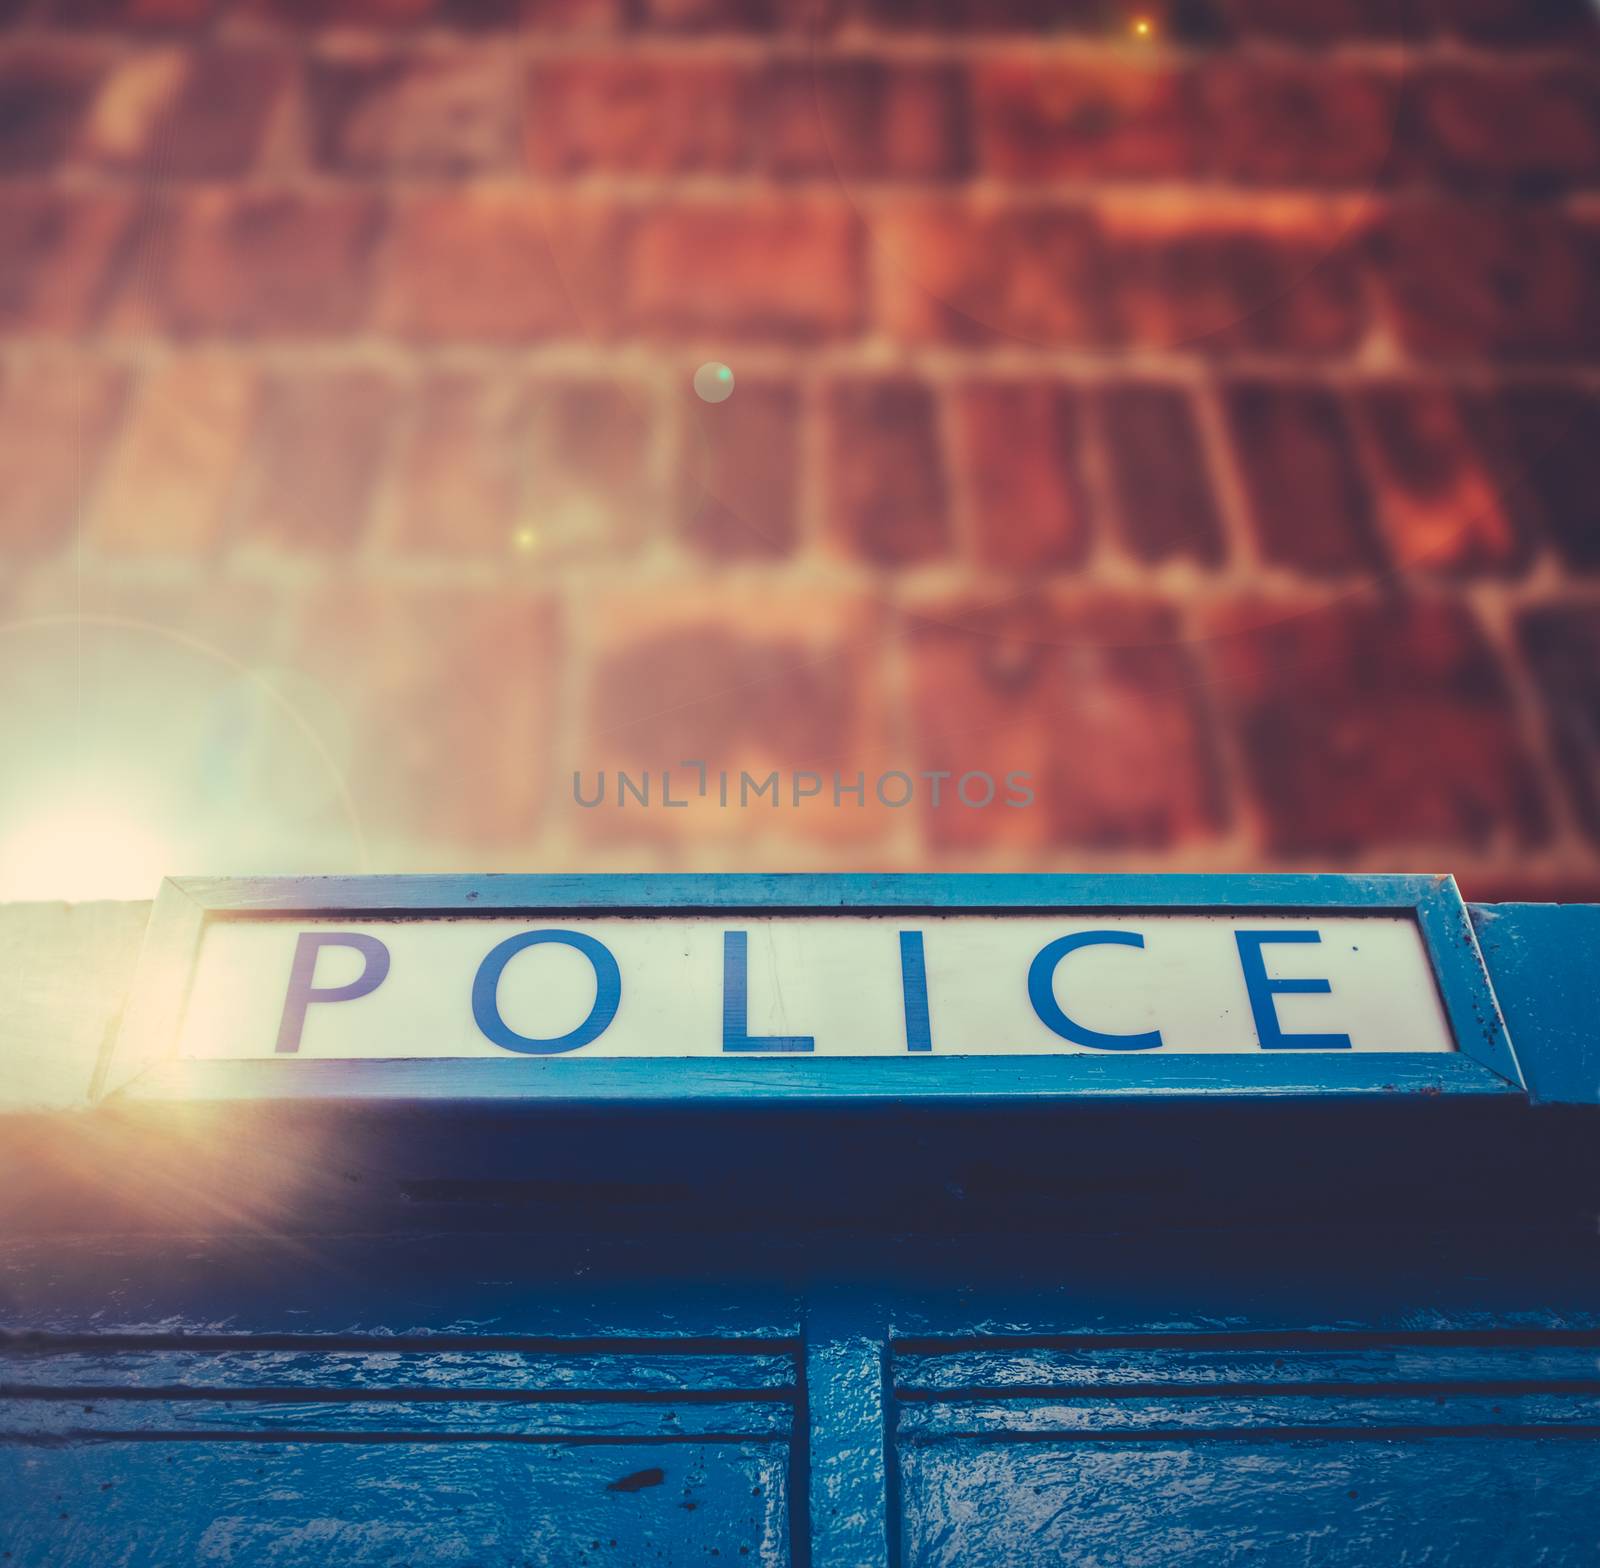 British Police Box With Lens Flare Against A Red Brick Wall With Copy Space